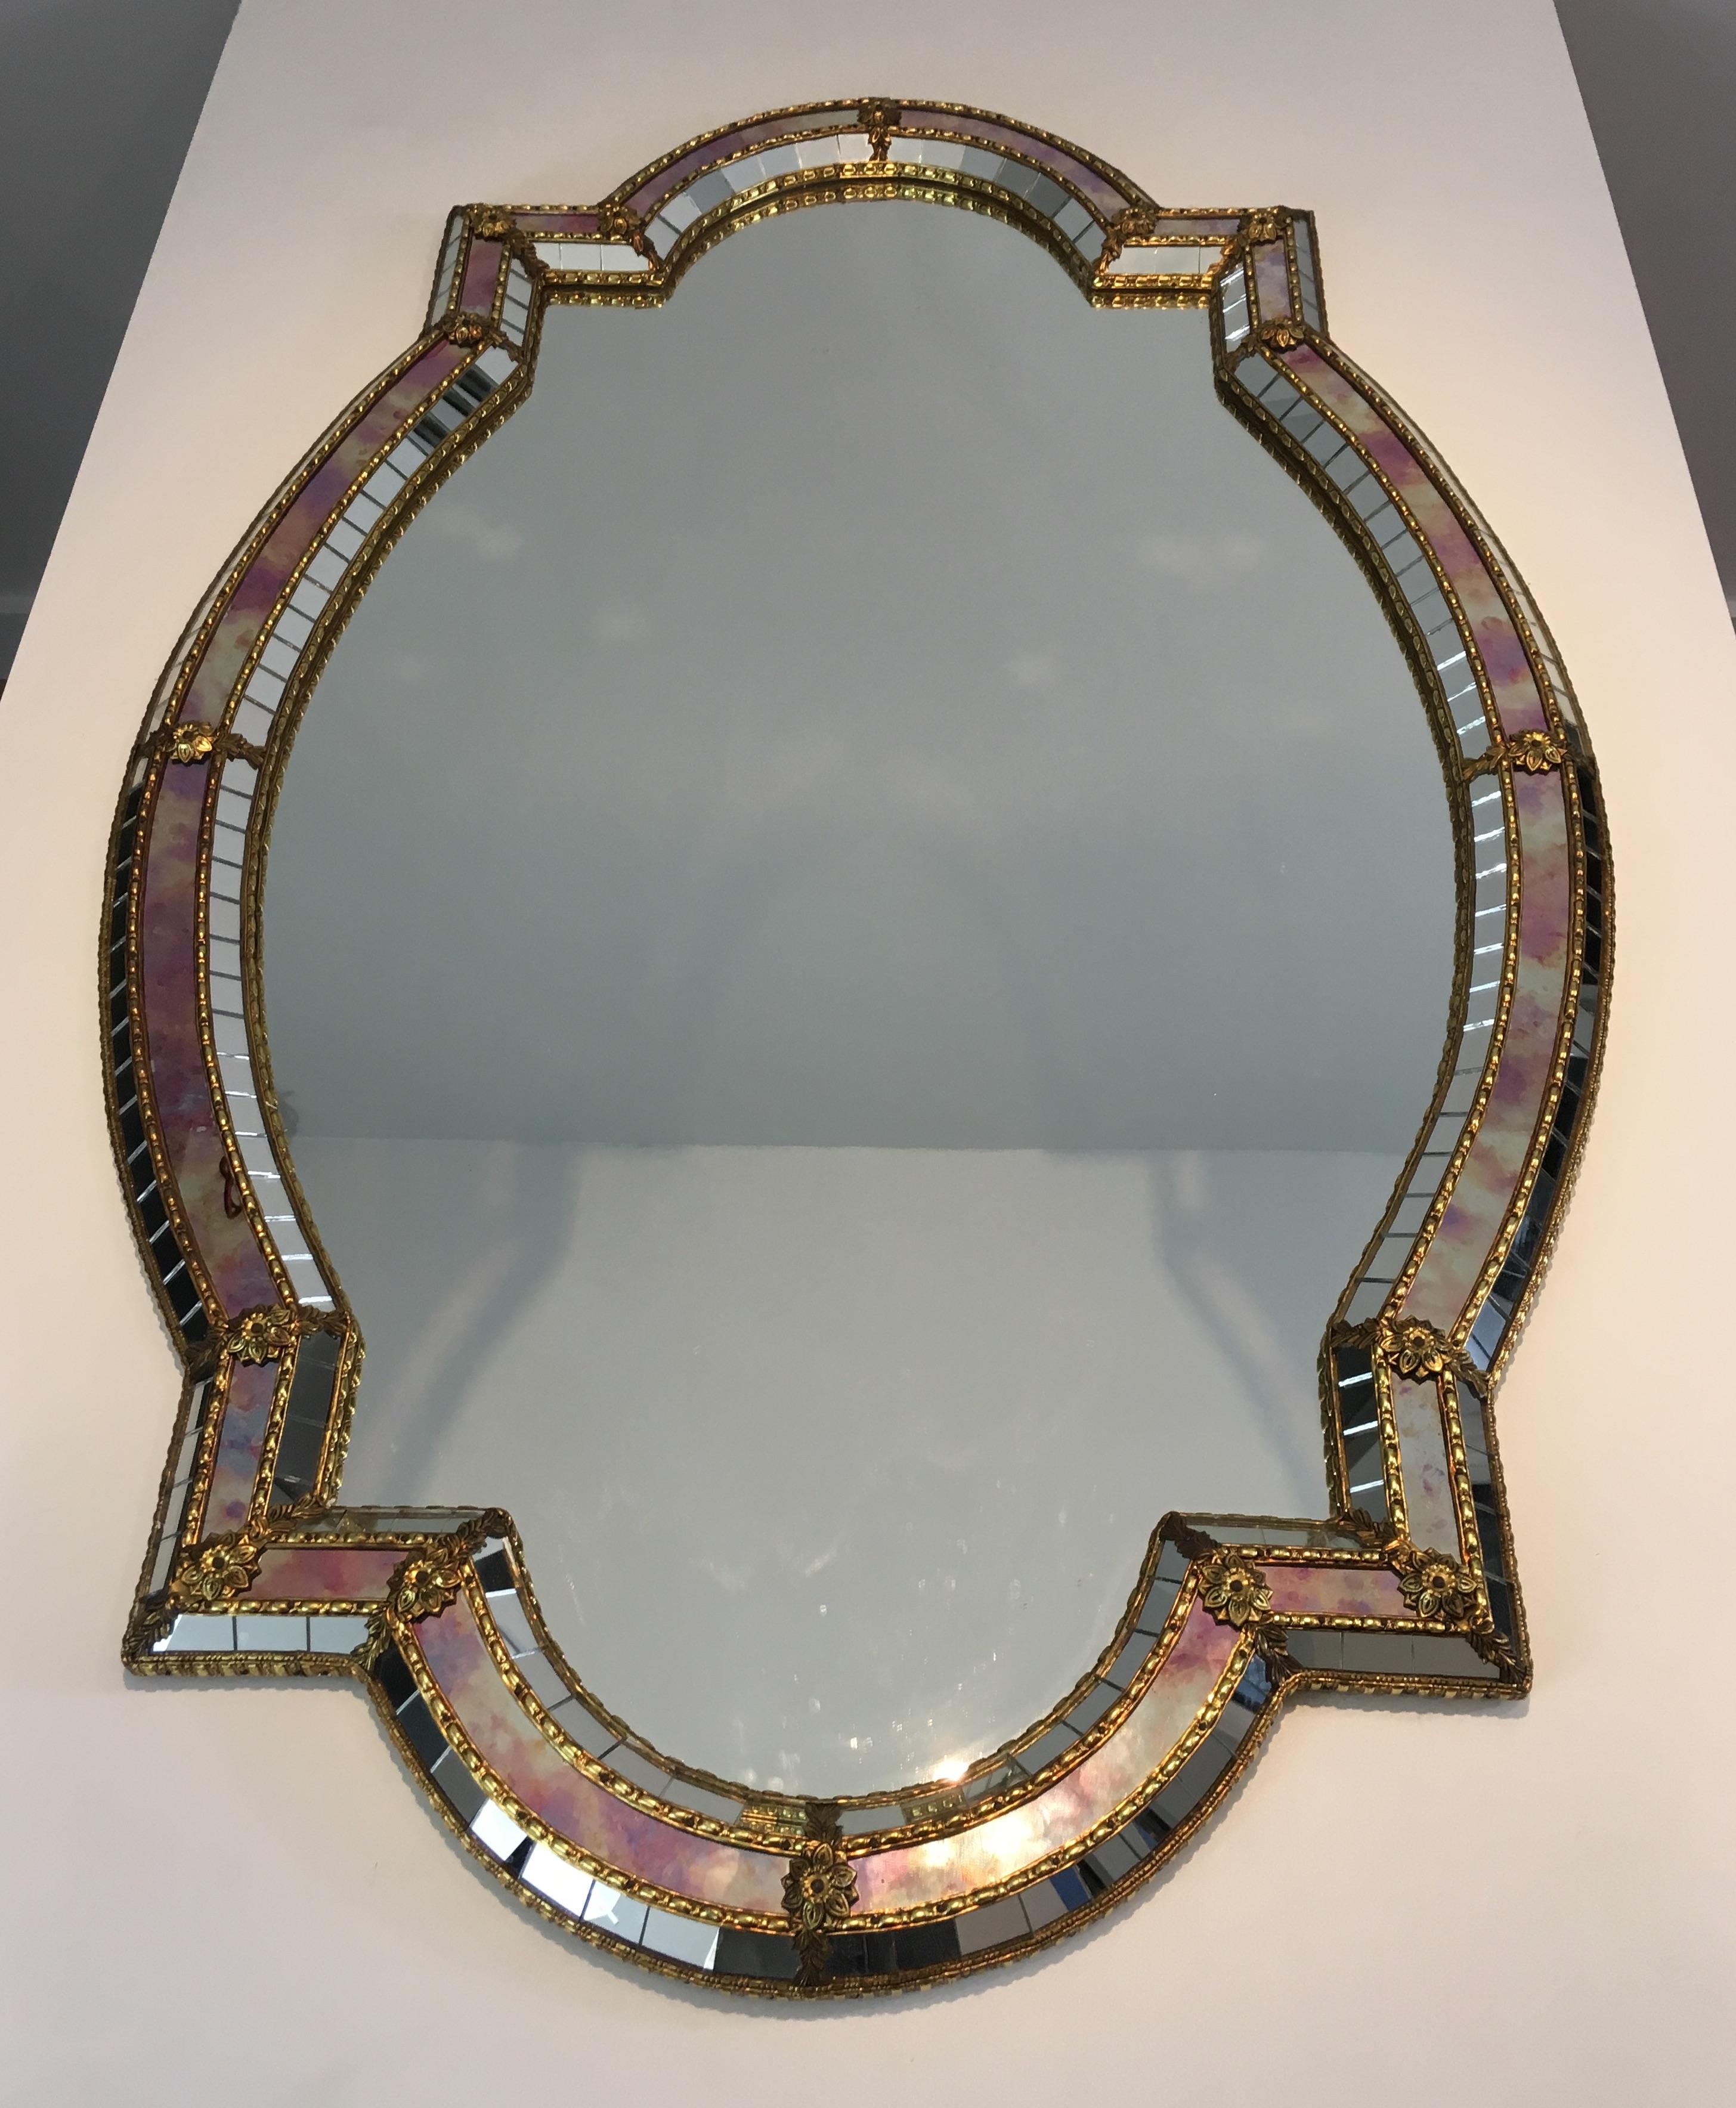 Unusual Shape Multi-Faceted Mirror with Mirrors Mosaics, Brass Flowers 7